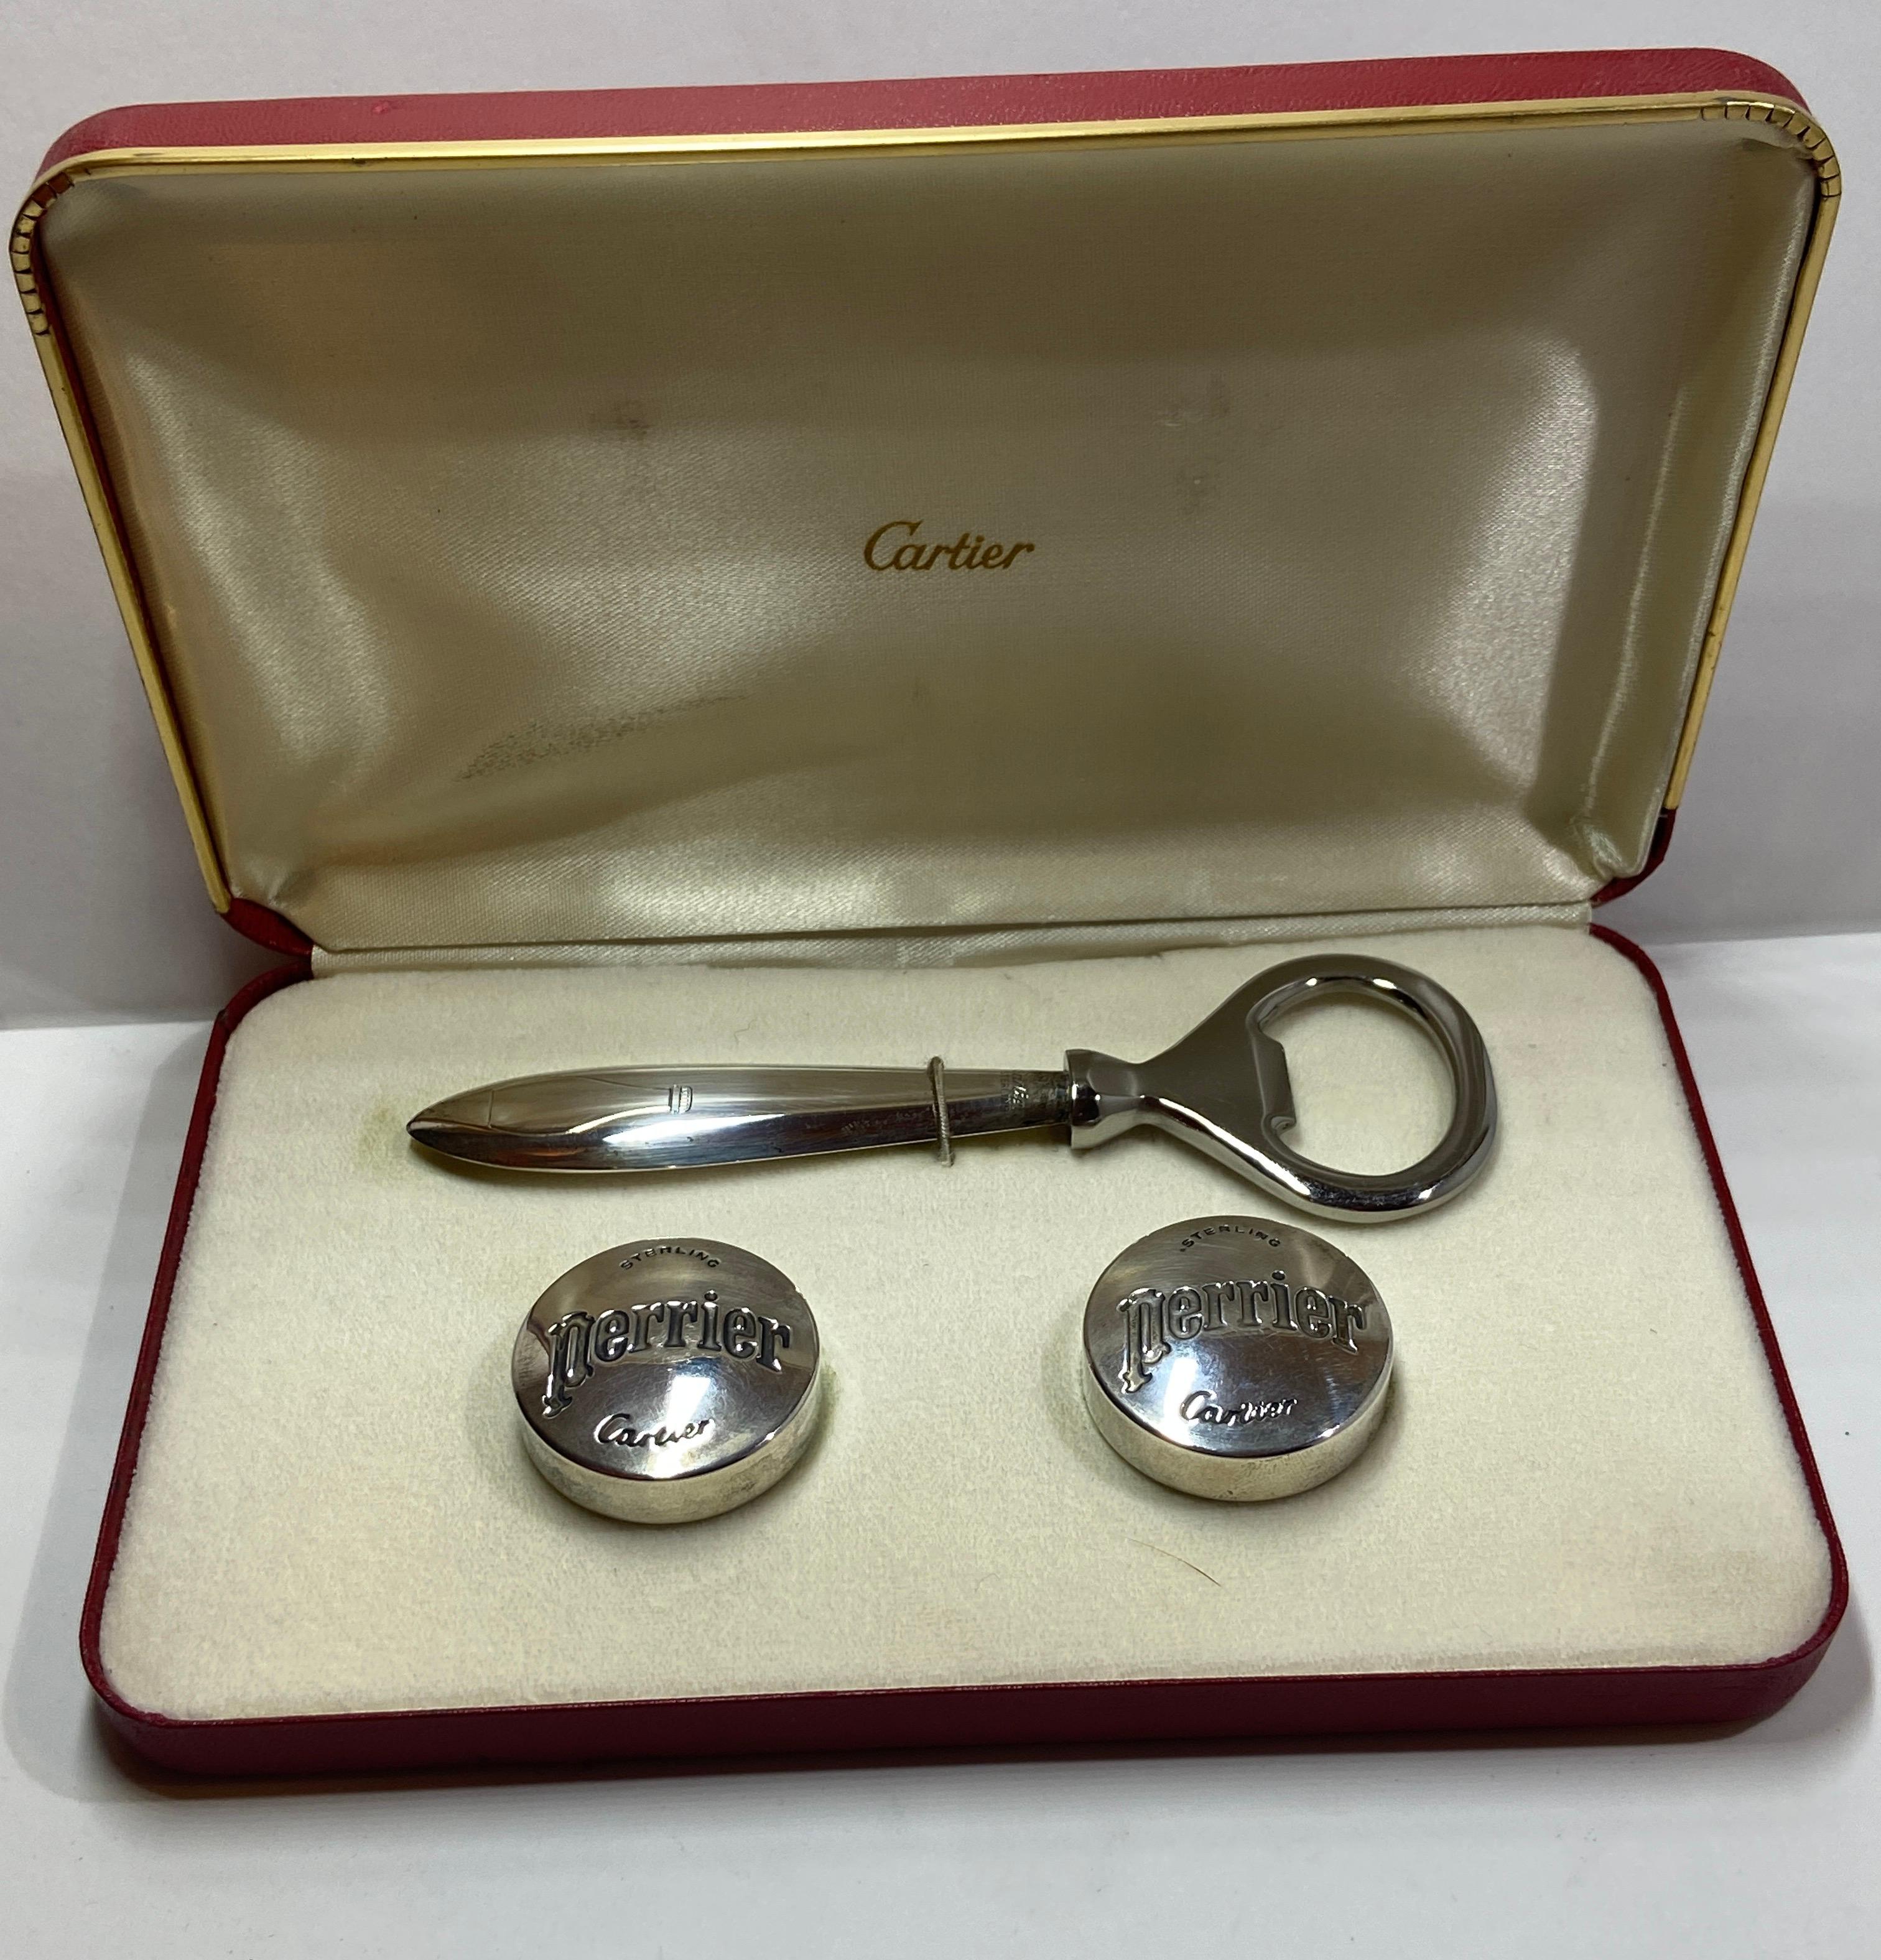 Cartier Boxed Sterling Silver Set of Perrier Bottle Caps and Bottle Opener For Sale 7